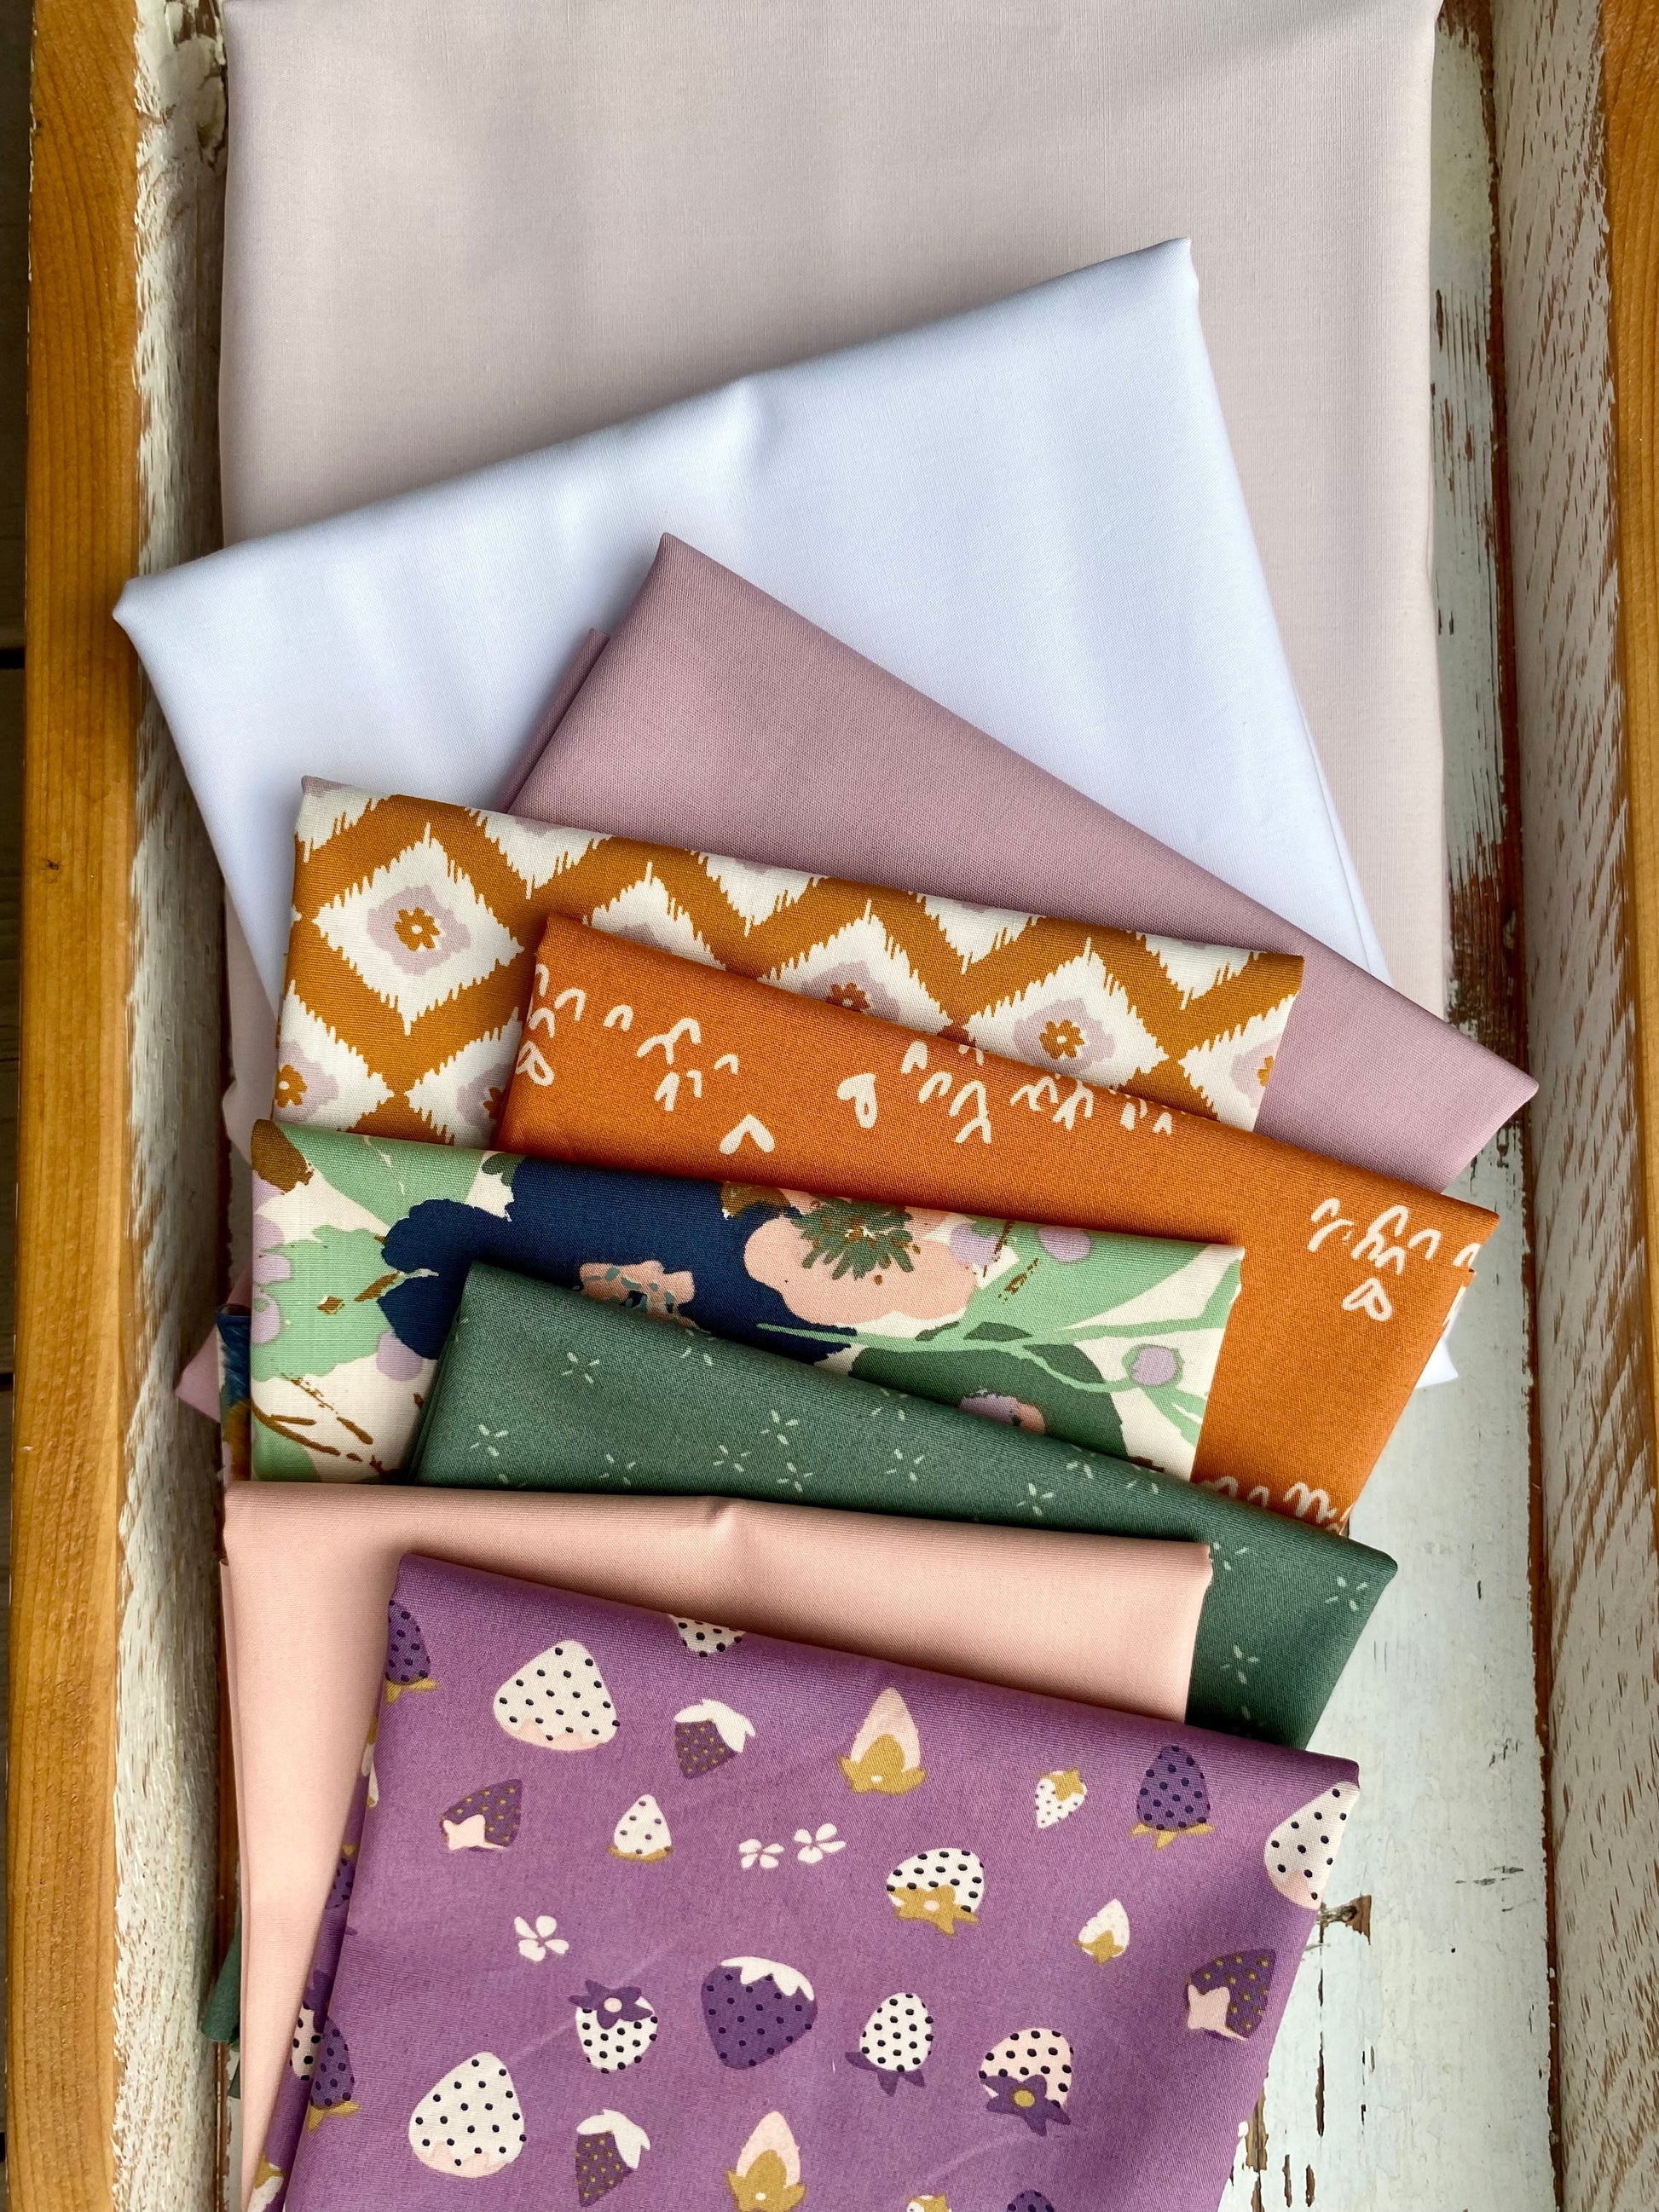 Curated quilt kit by Dolly Lou Fabrics for the pattern Heirloom Hearts 